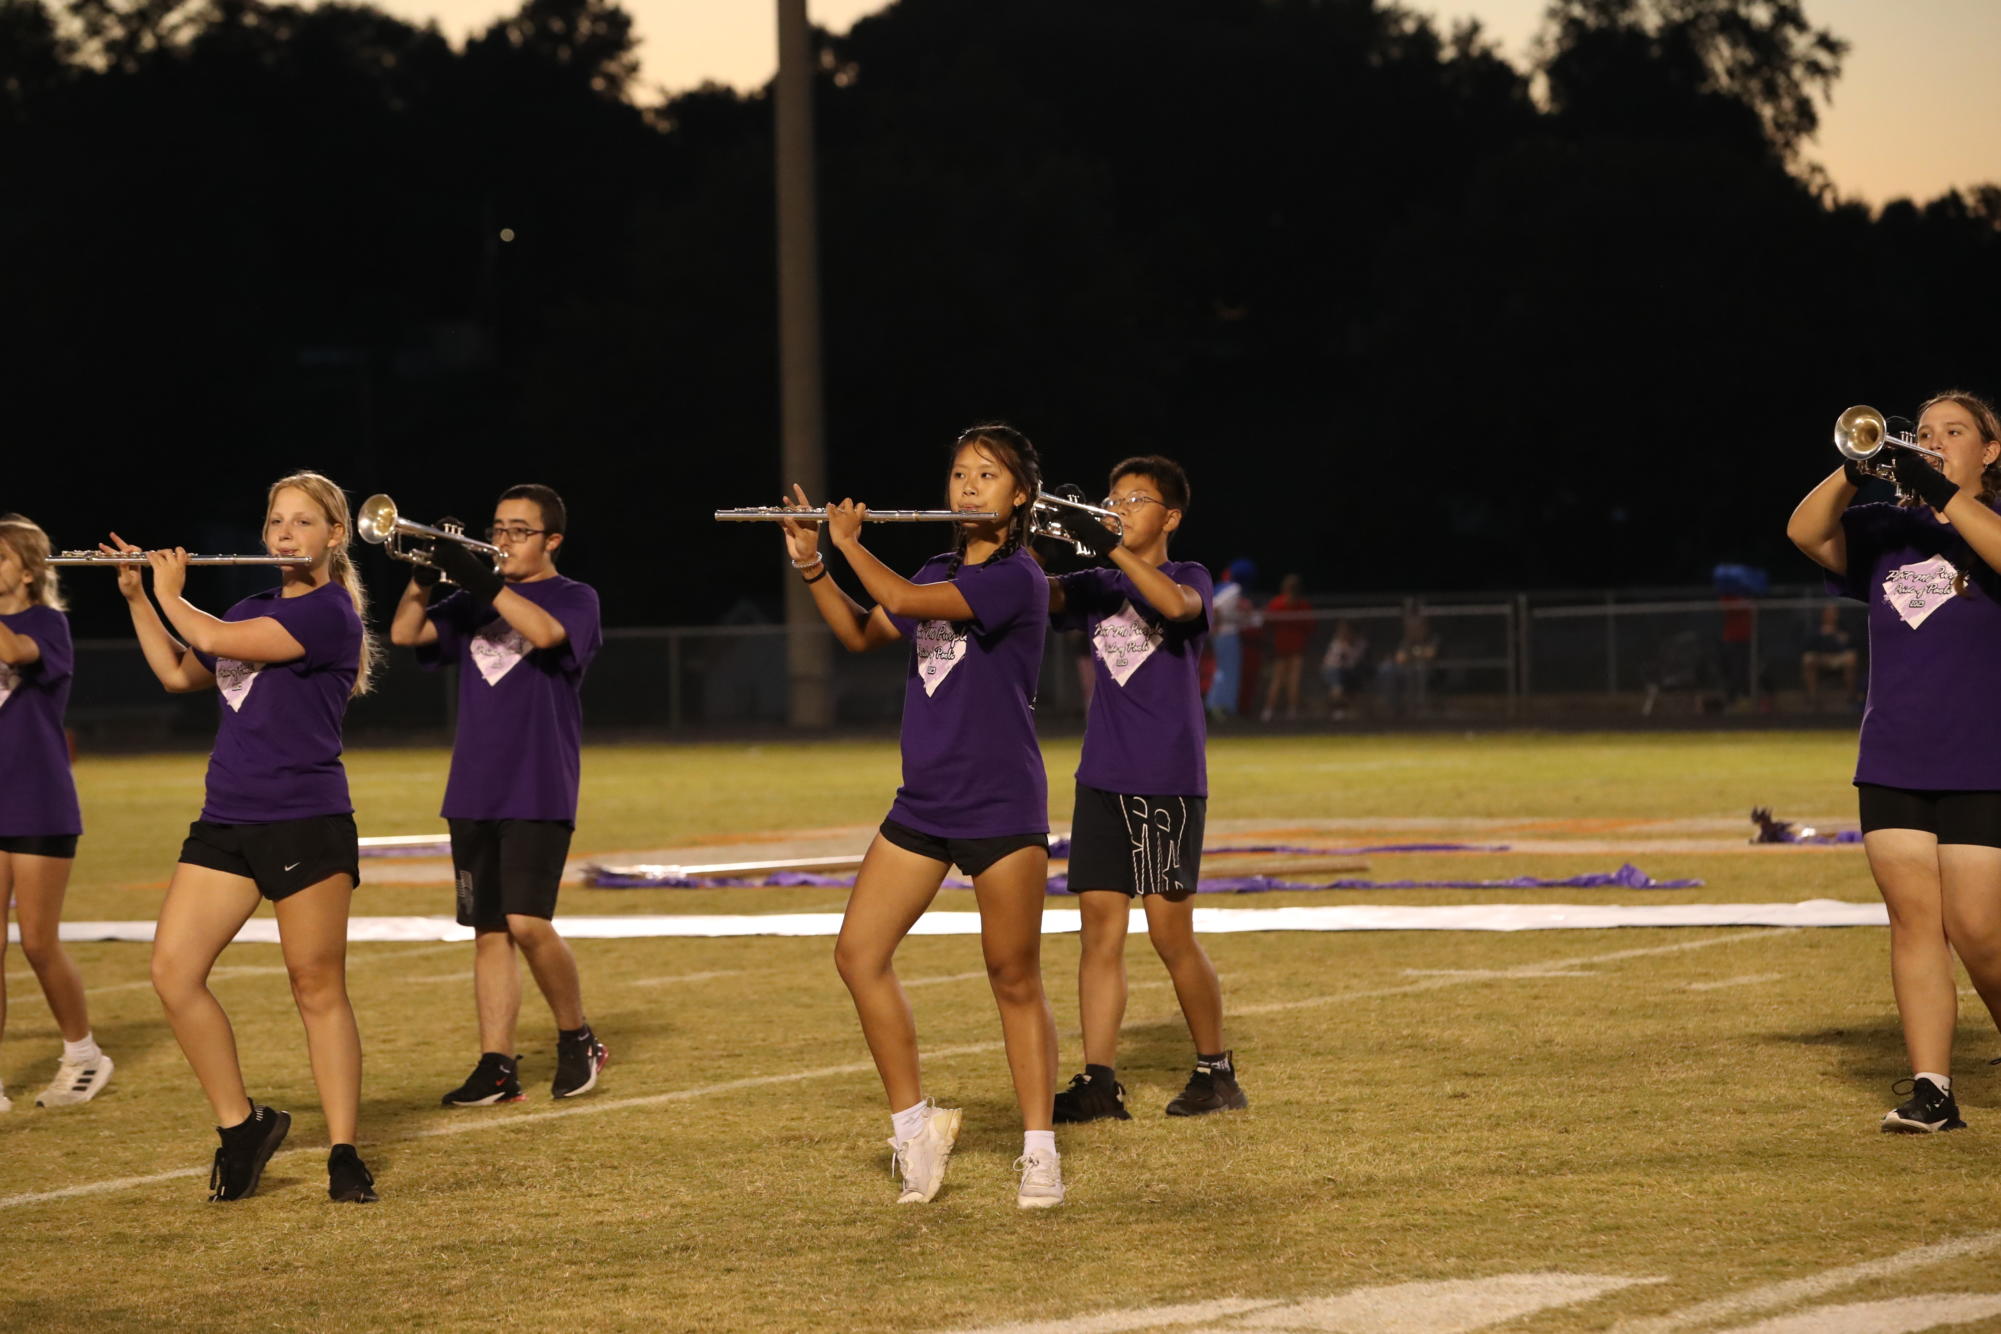 The Pride of Paoli performs during part two of the show.